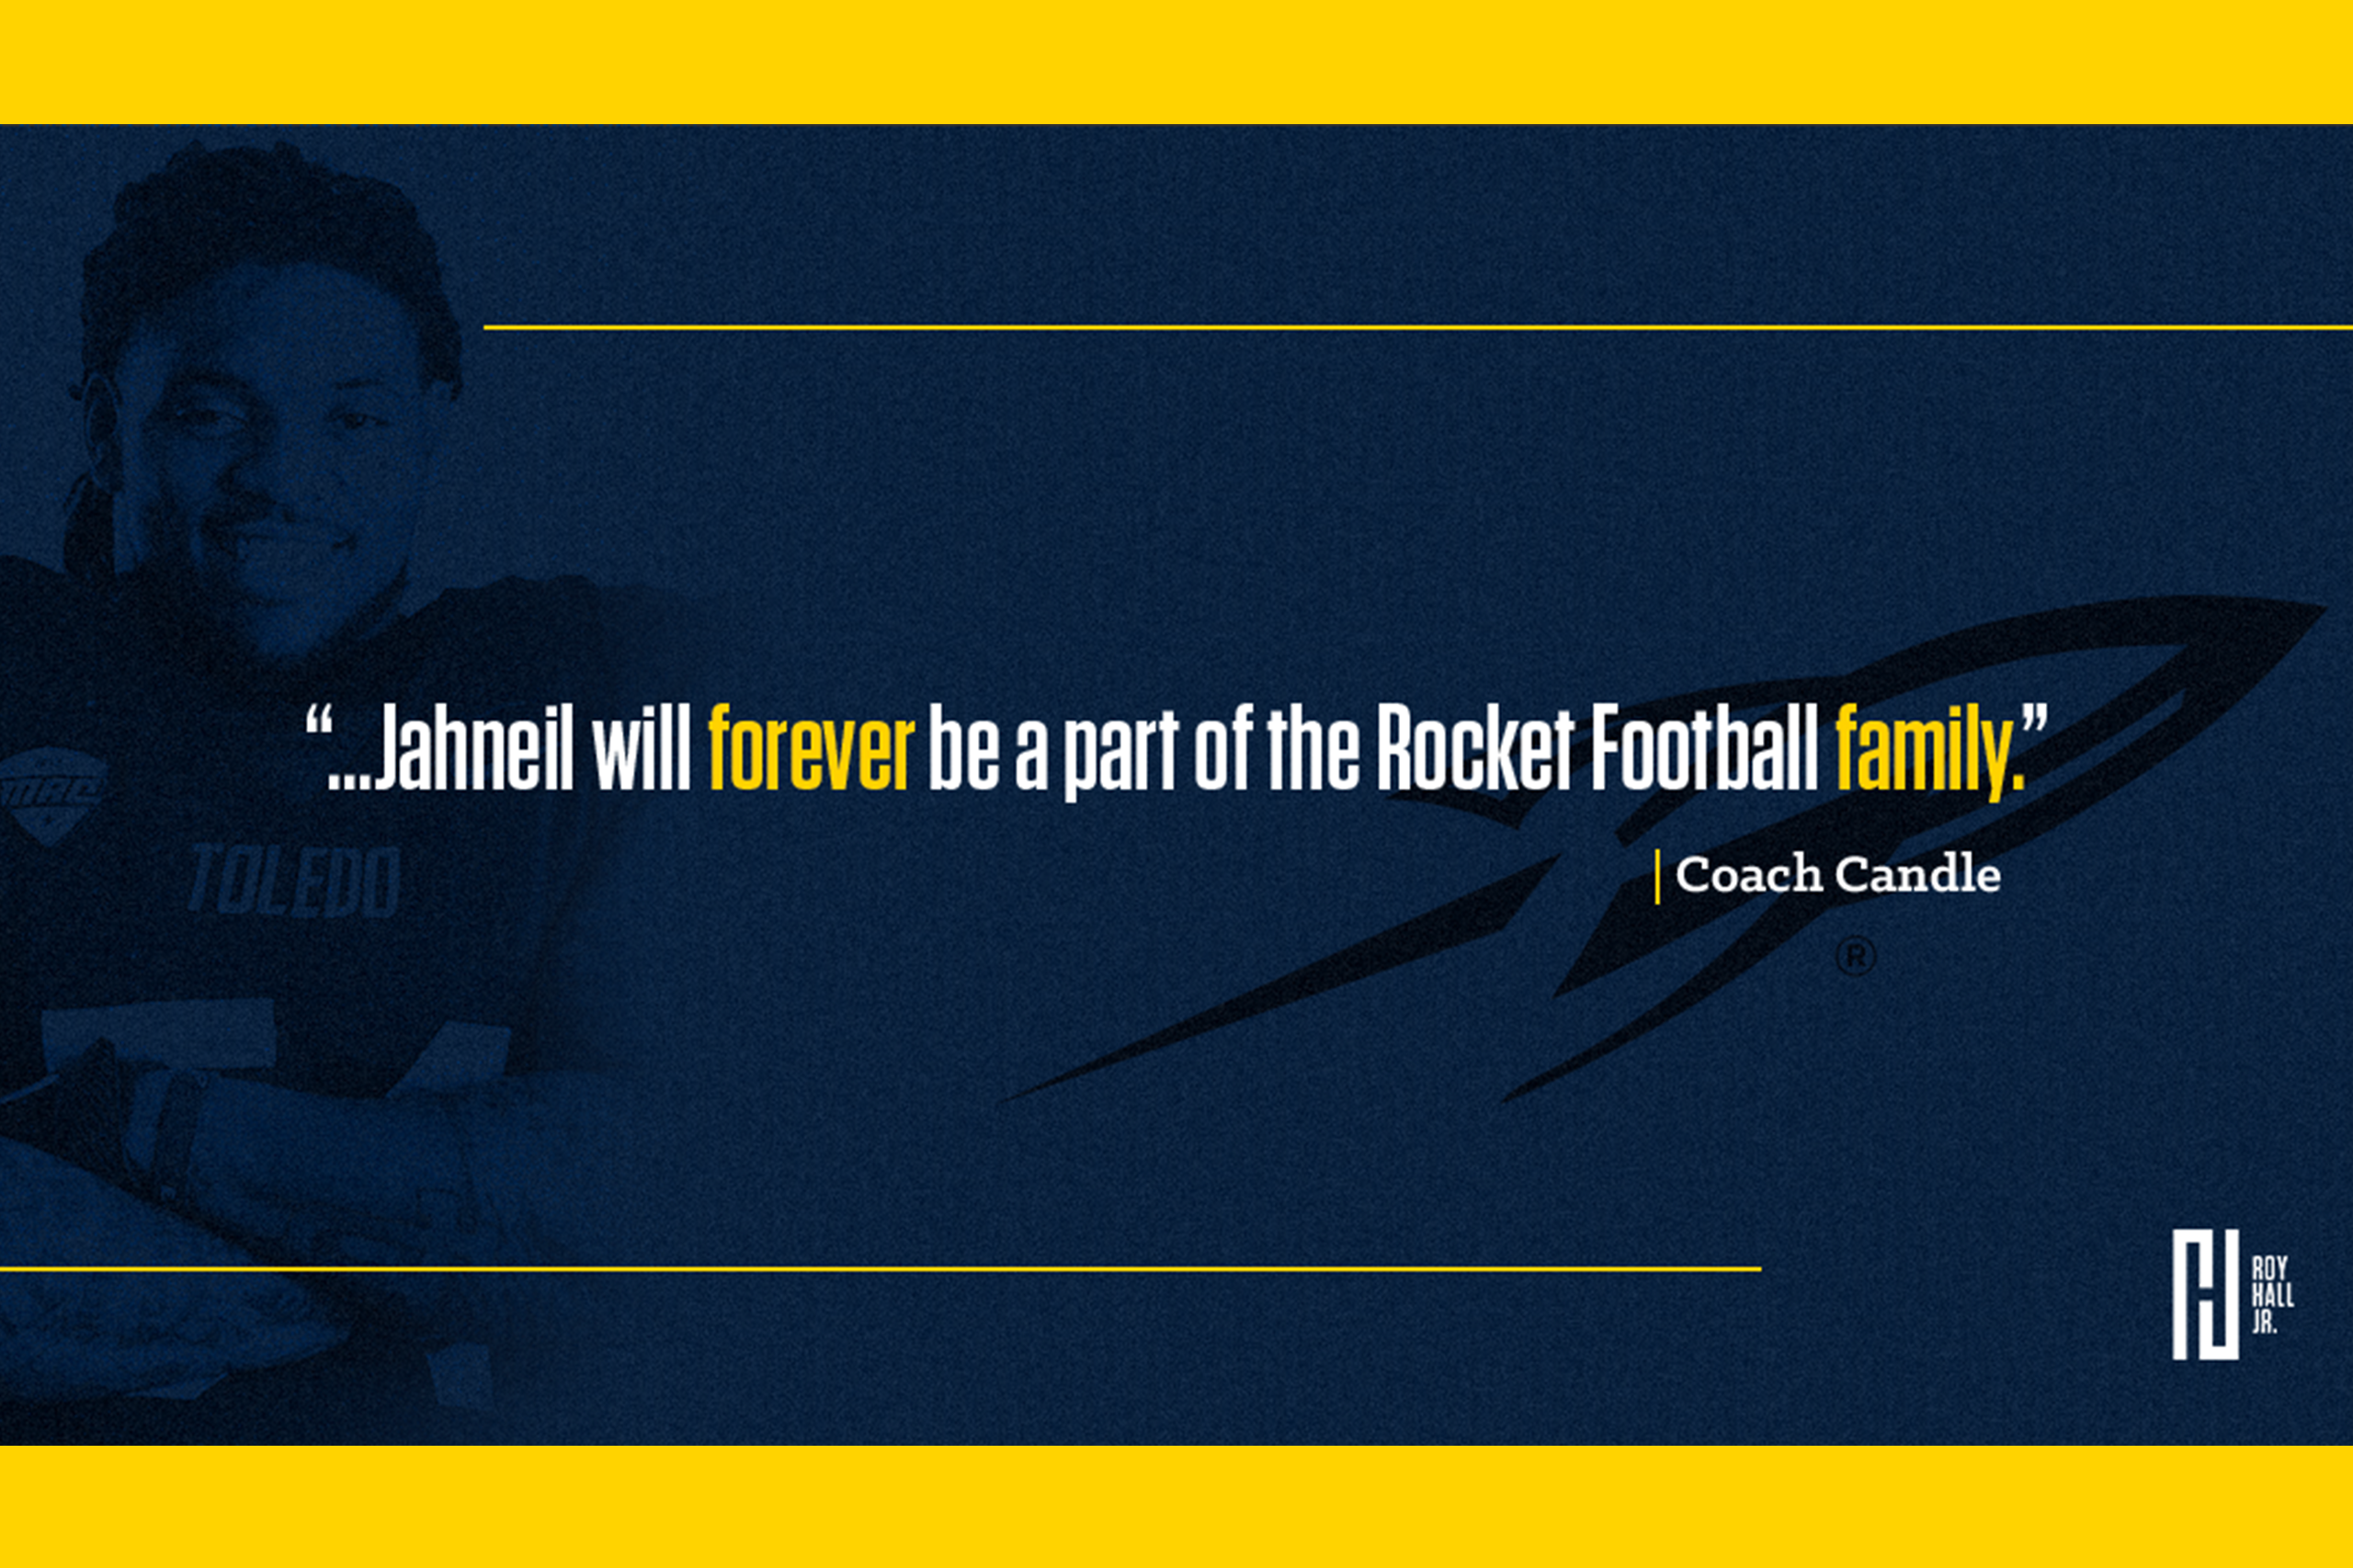 Jahneil will forever be a part of the Rocket Football family.